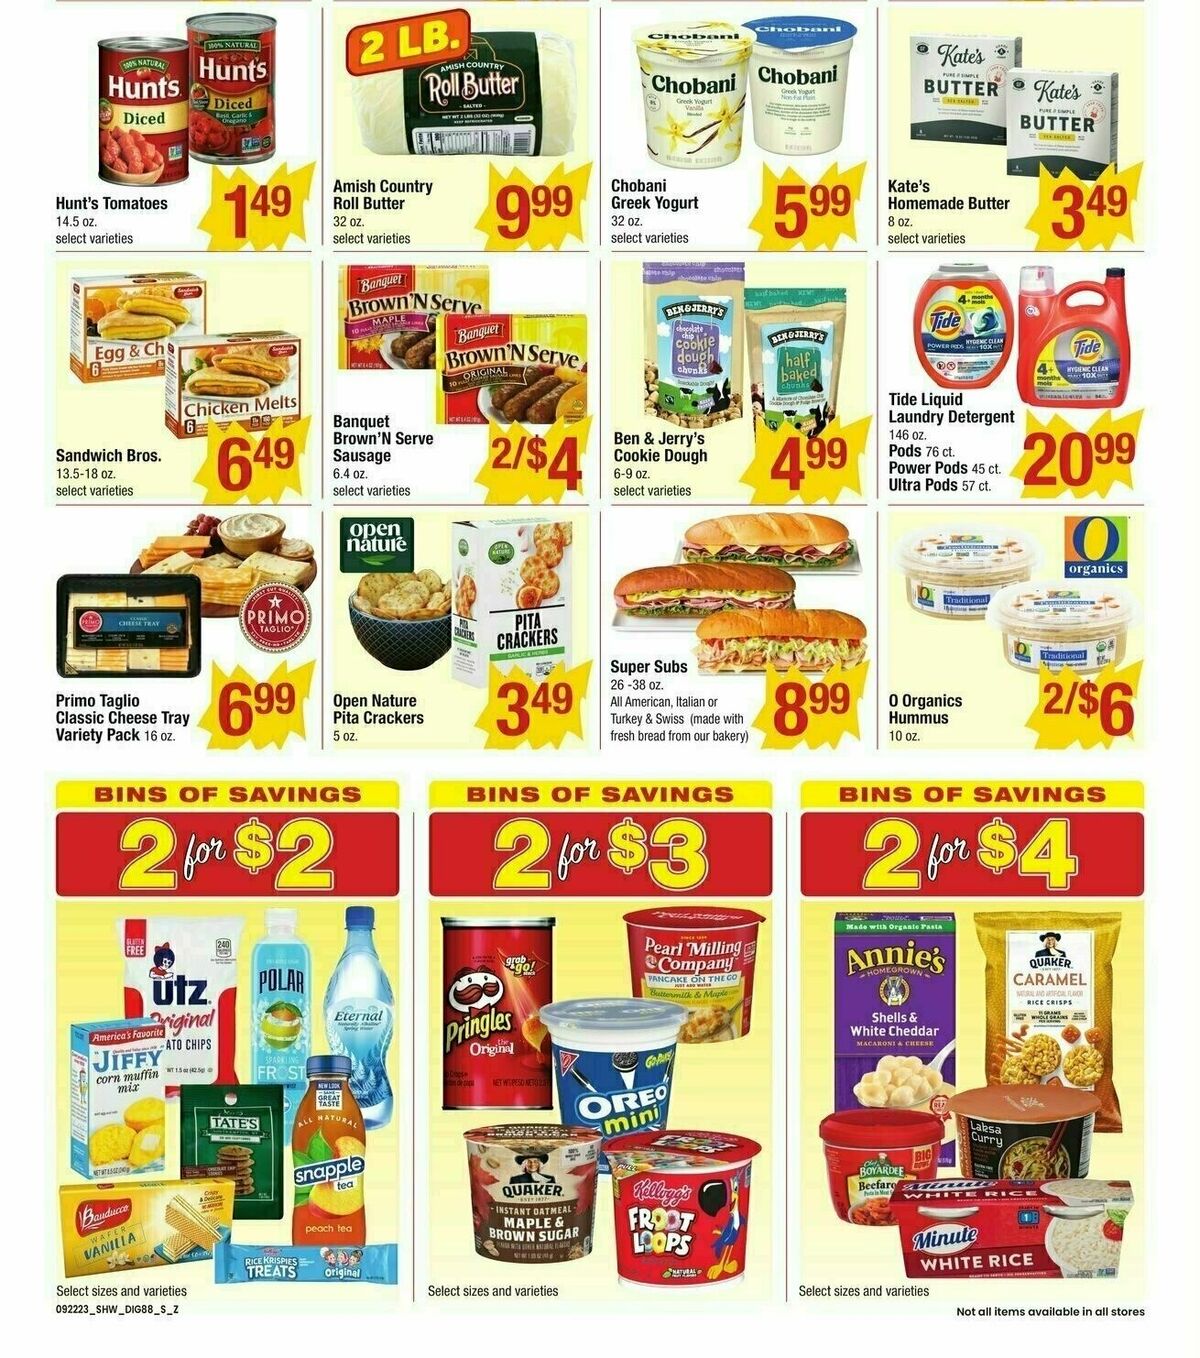 Shaw's Additional Savings Weekly Ad from September 21